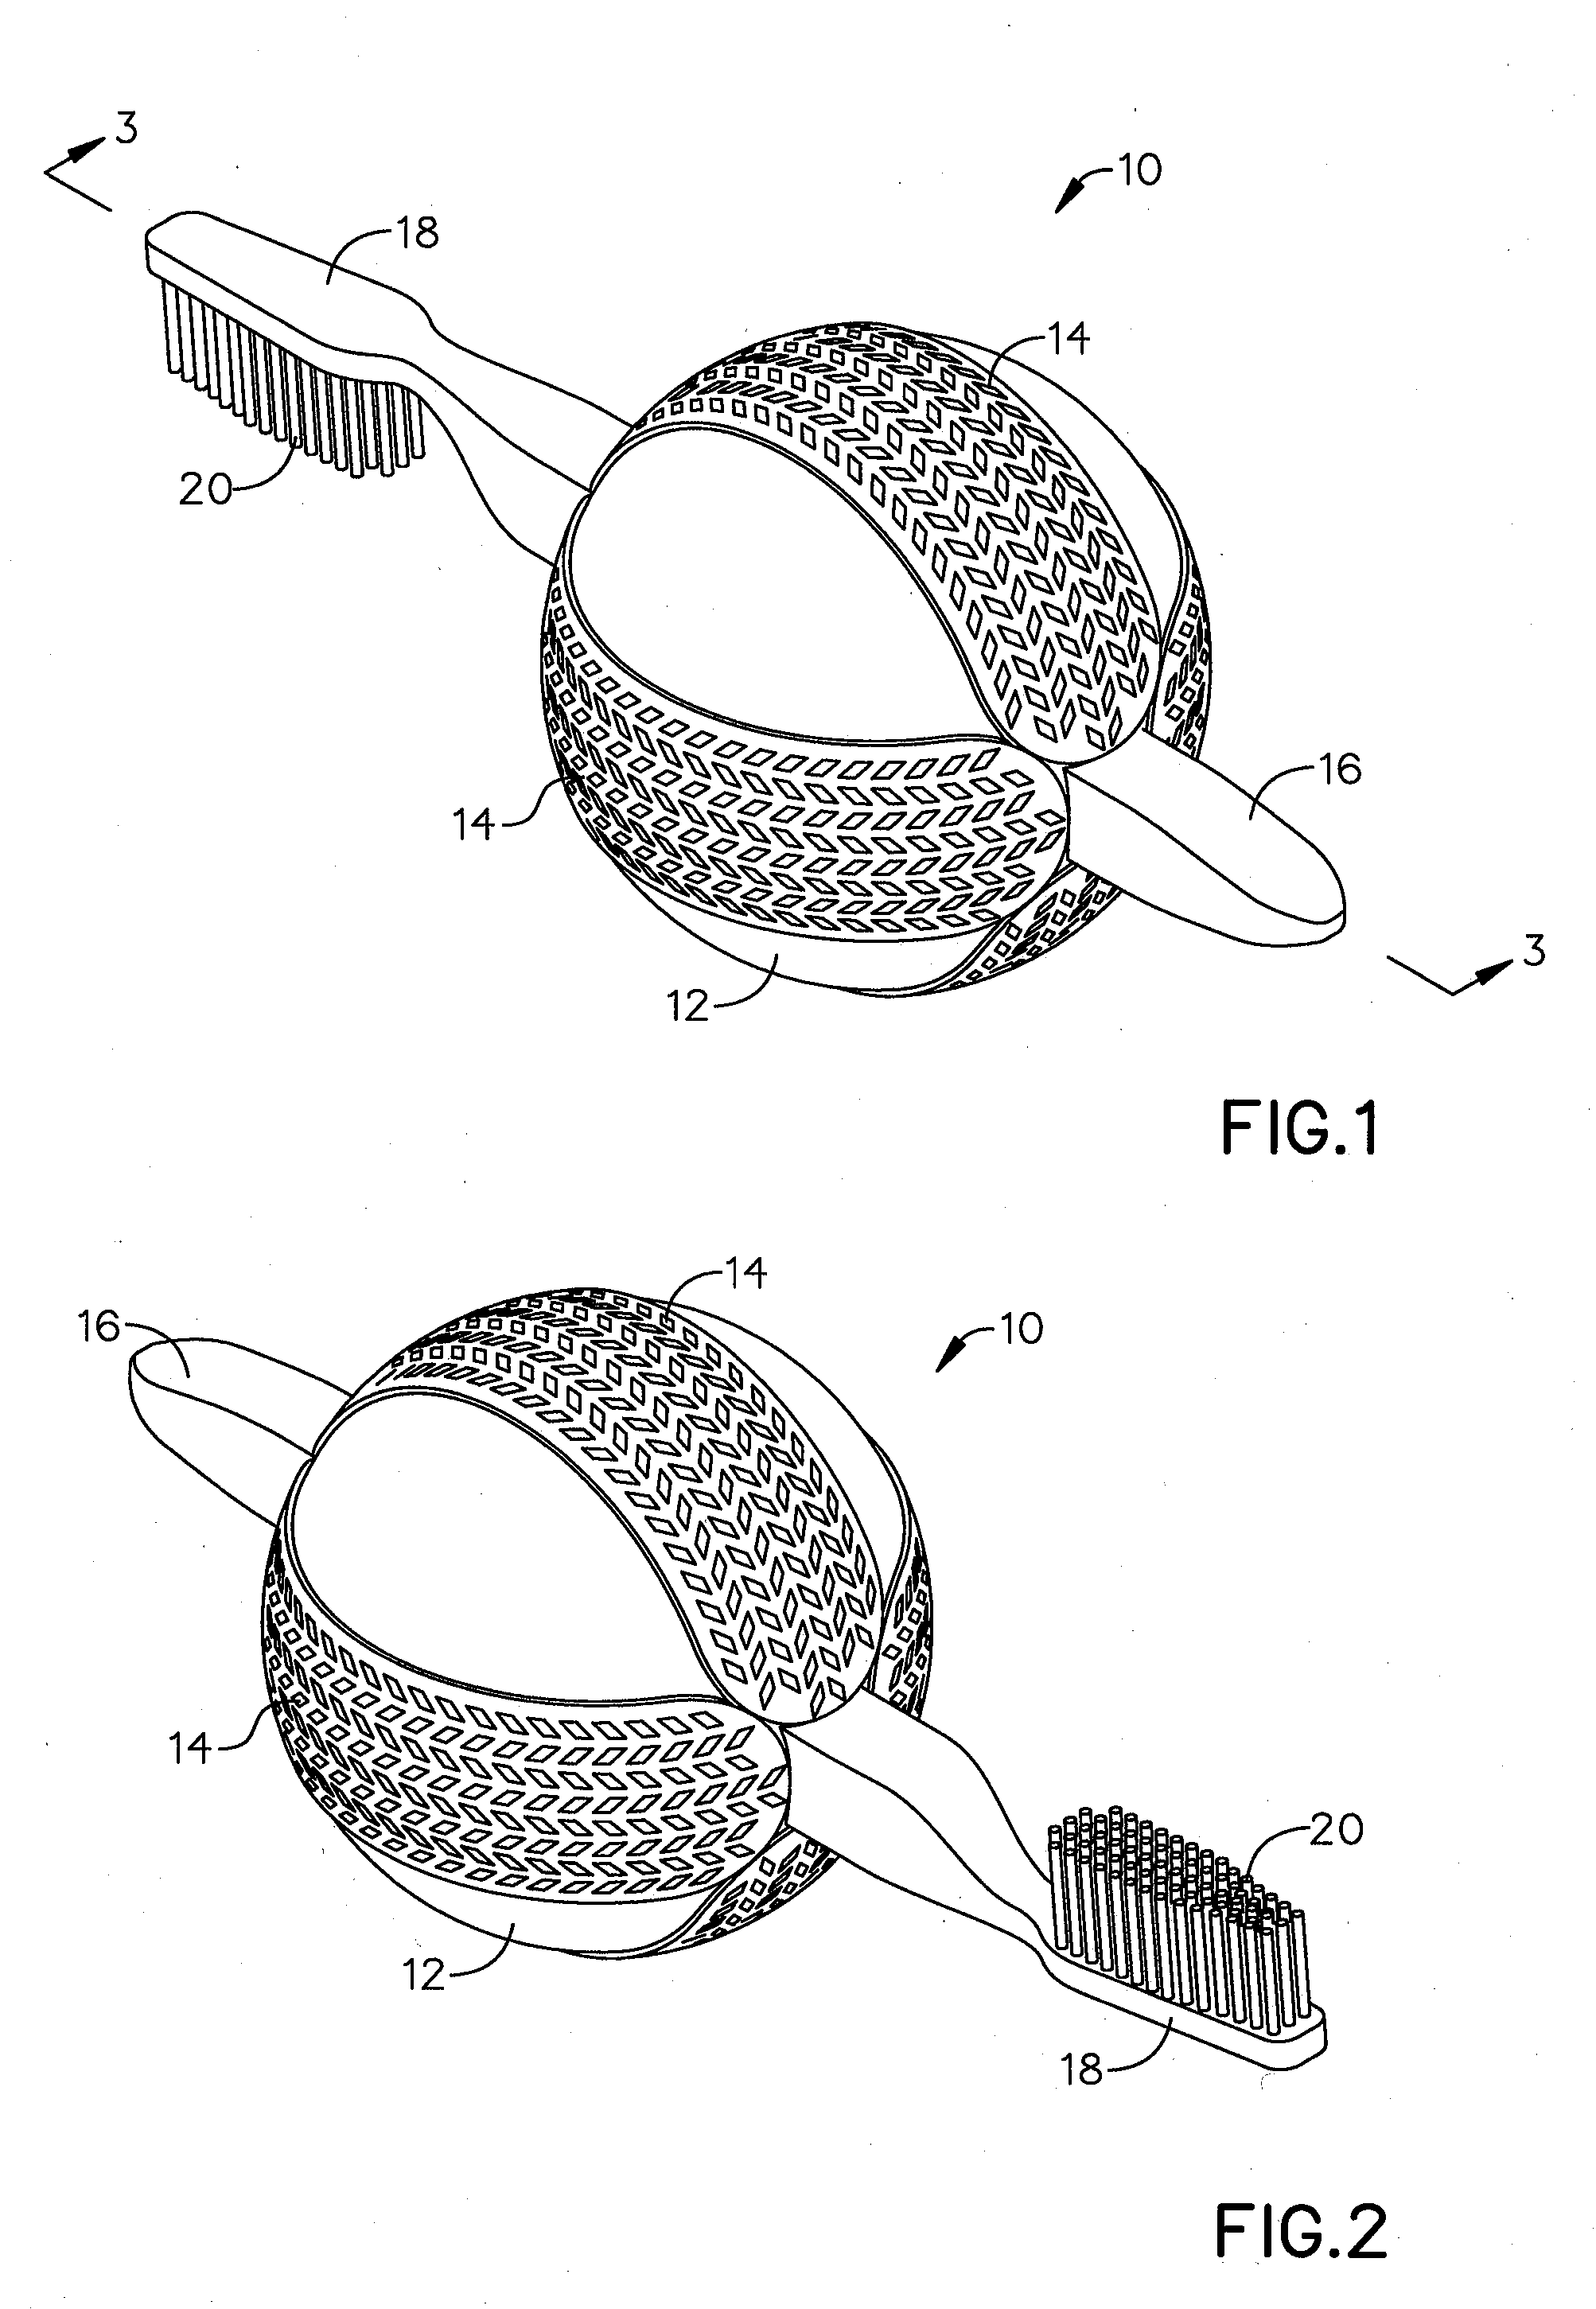 Method of Using a Toothbrush with Palmar Grip Handle for Dexterity Rehabilitation